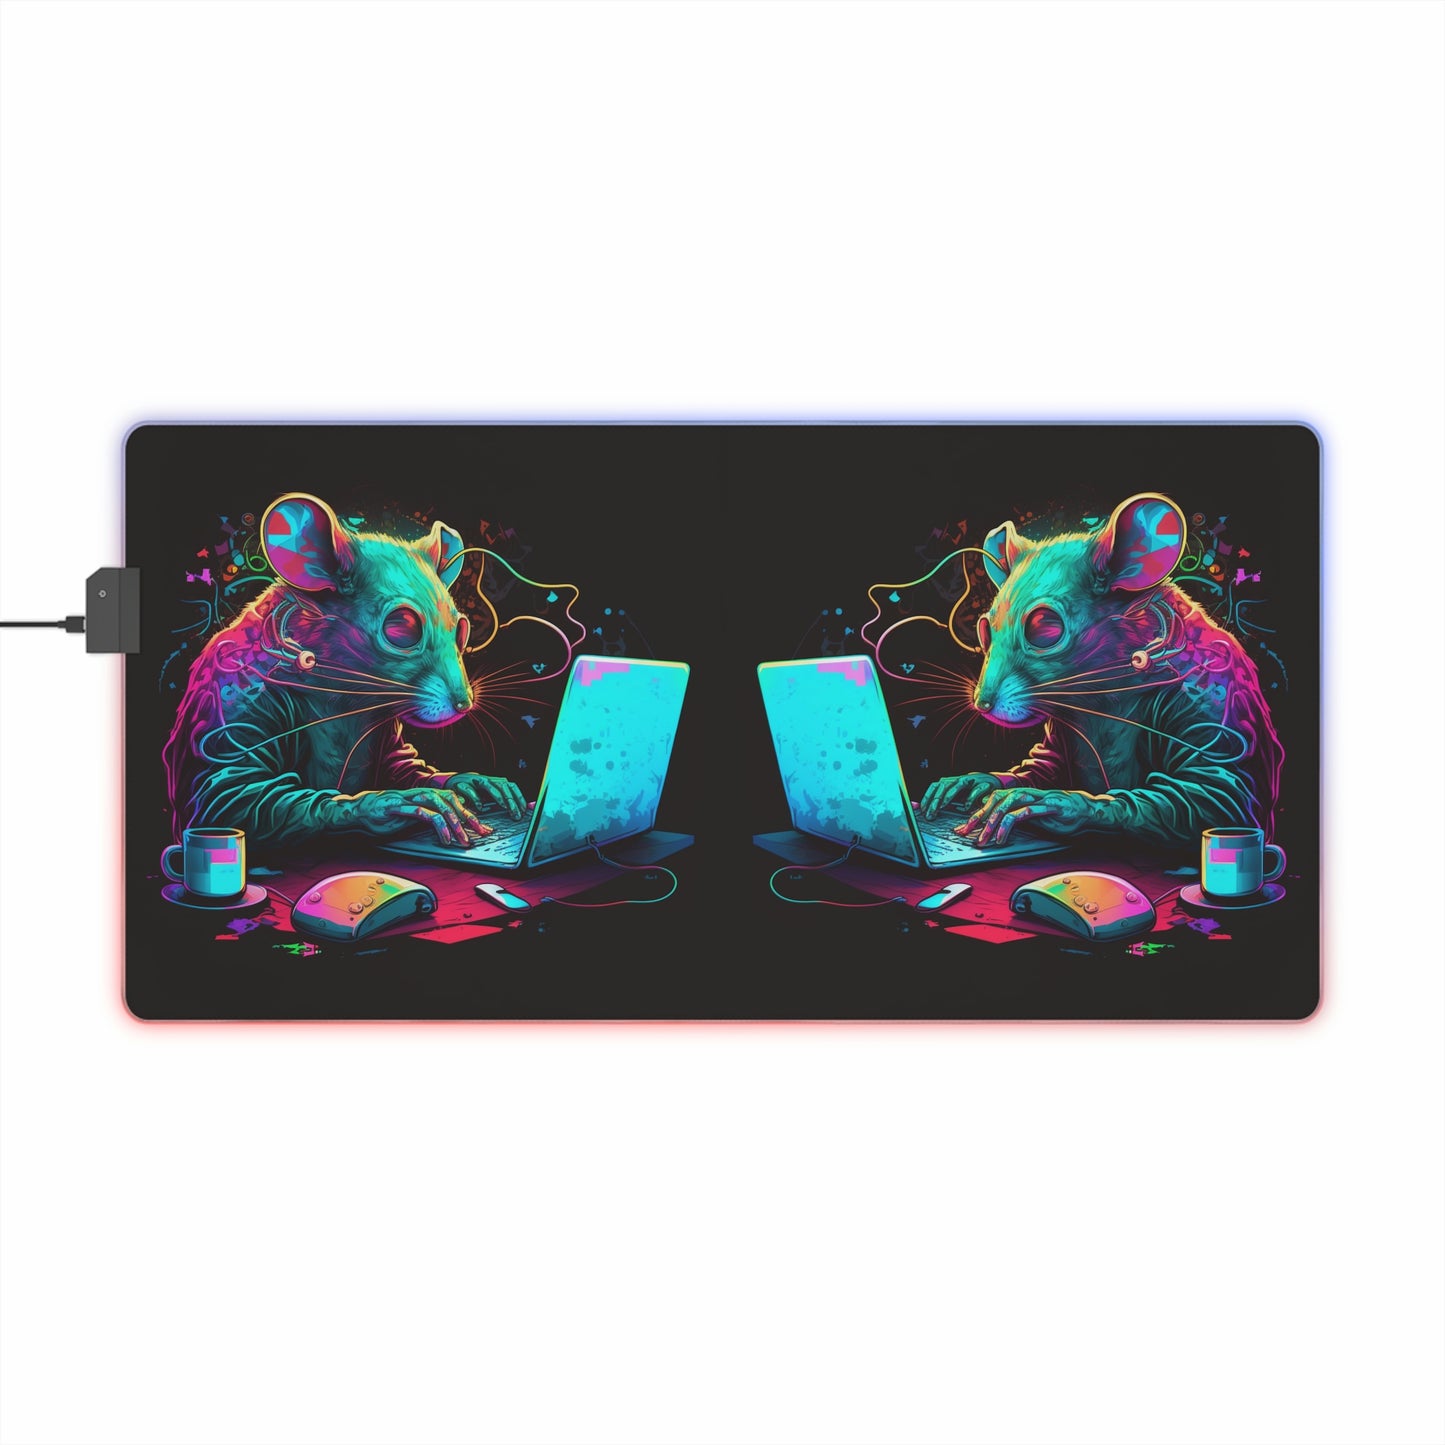 LED Gaming Mouse Pad Neon Mouse 3